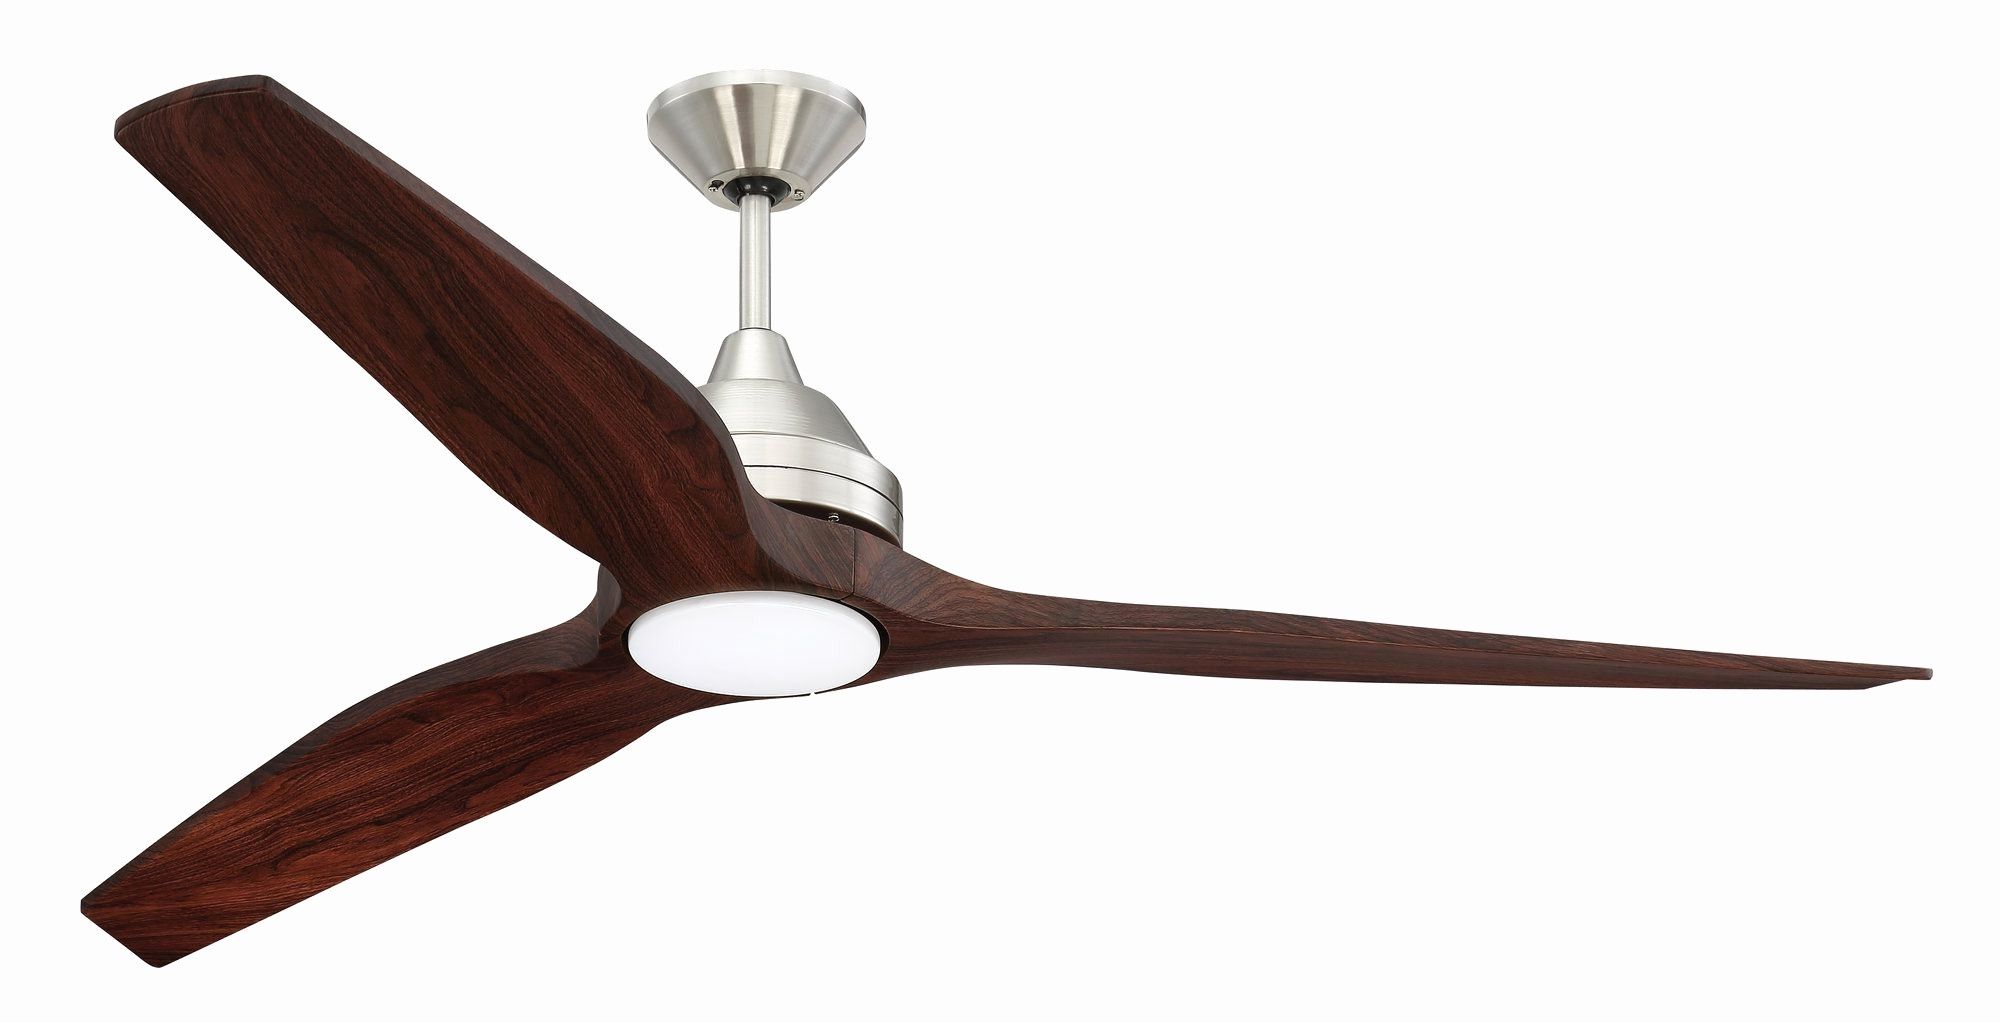 Most Recent Amazon Ceiling Fans Fresh 60" Audrey 3 Blade Outdoor Ceiling Fan Intended For Outdoor Ceiling Fans At Amazon (View 12 of 20)